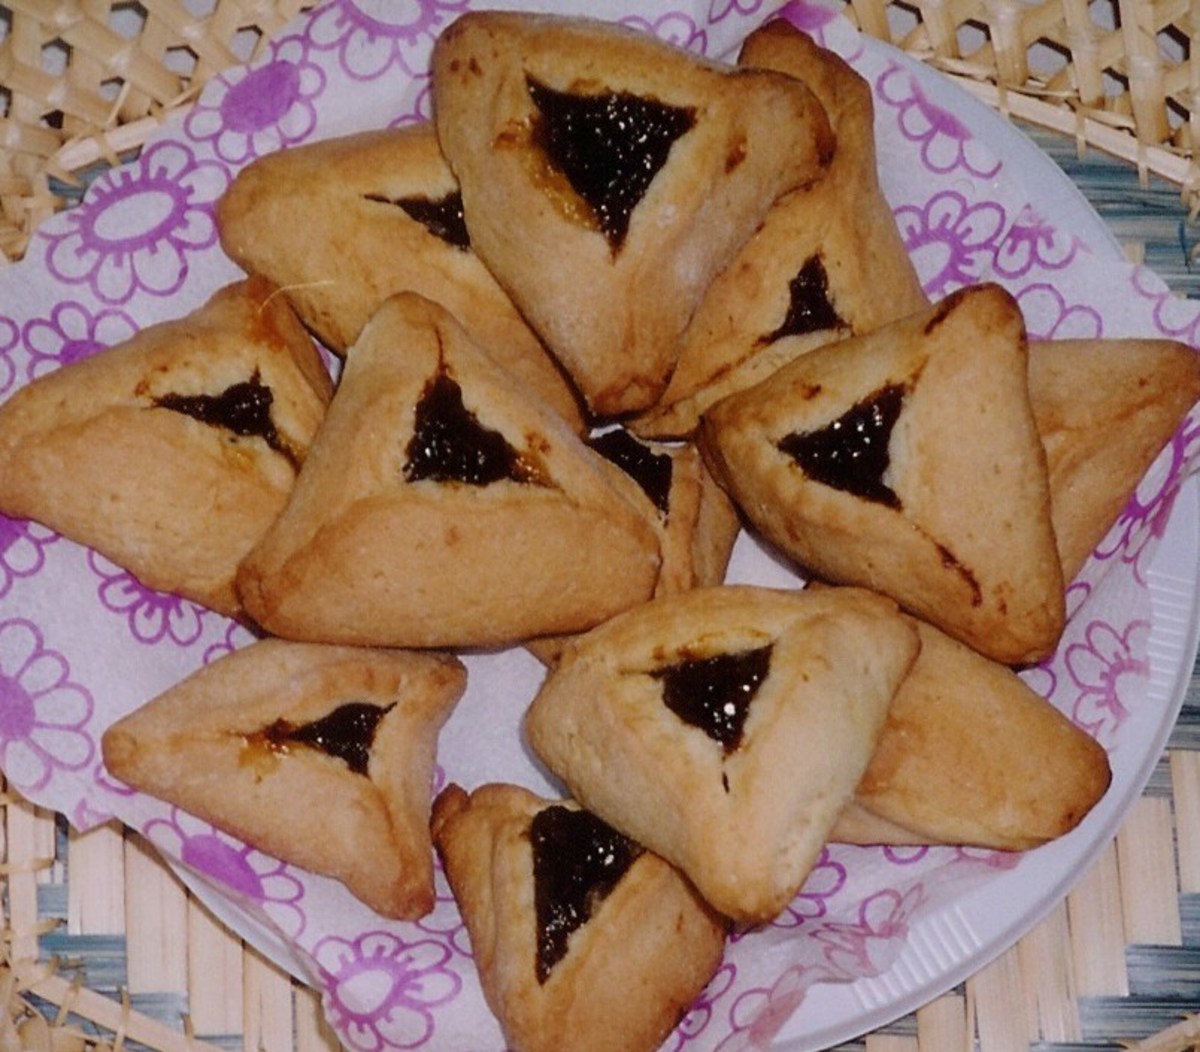 Jam-filled pastry cookies called Hamantaschen .  They are eaten at the holiday of Purim.